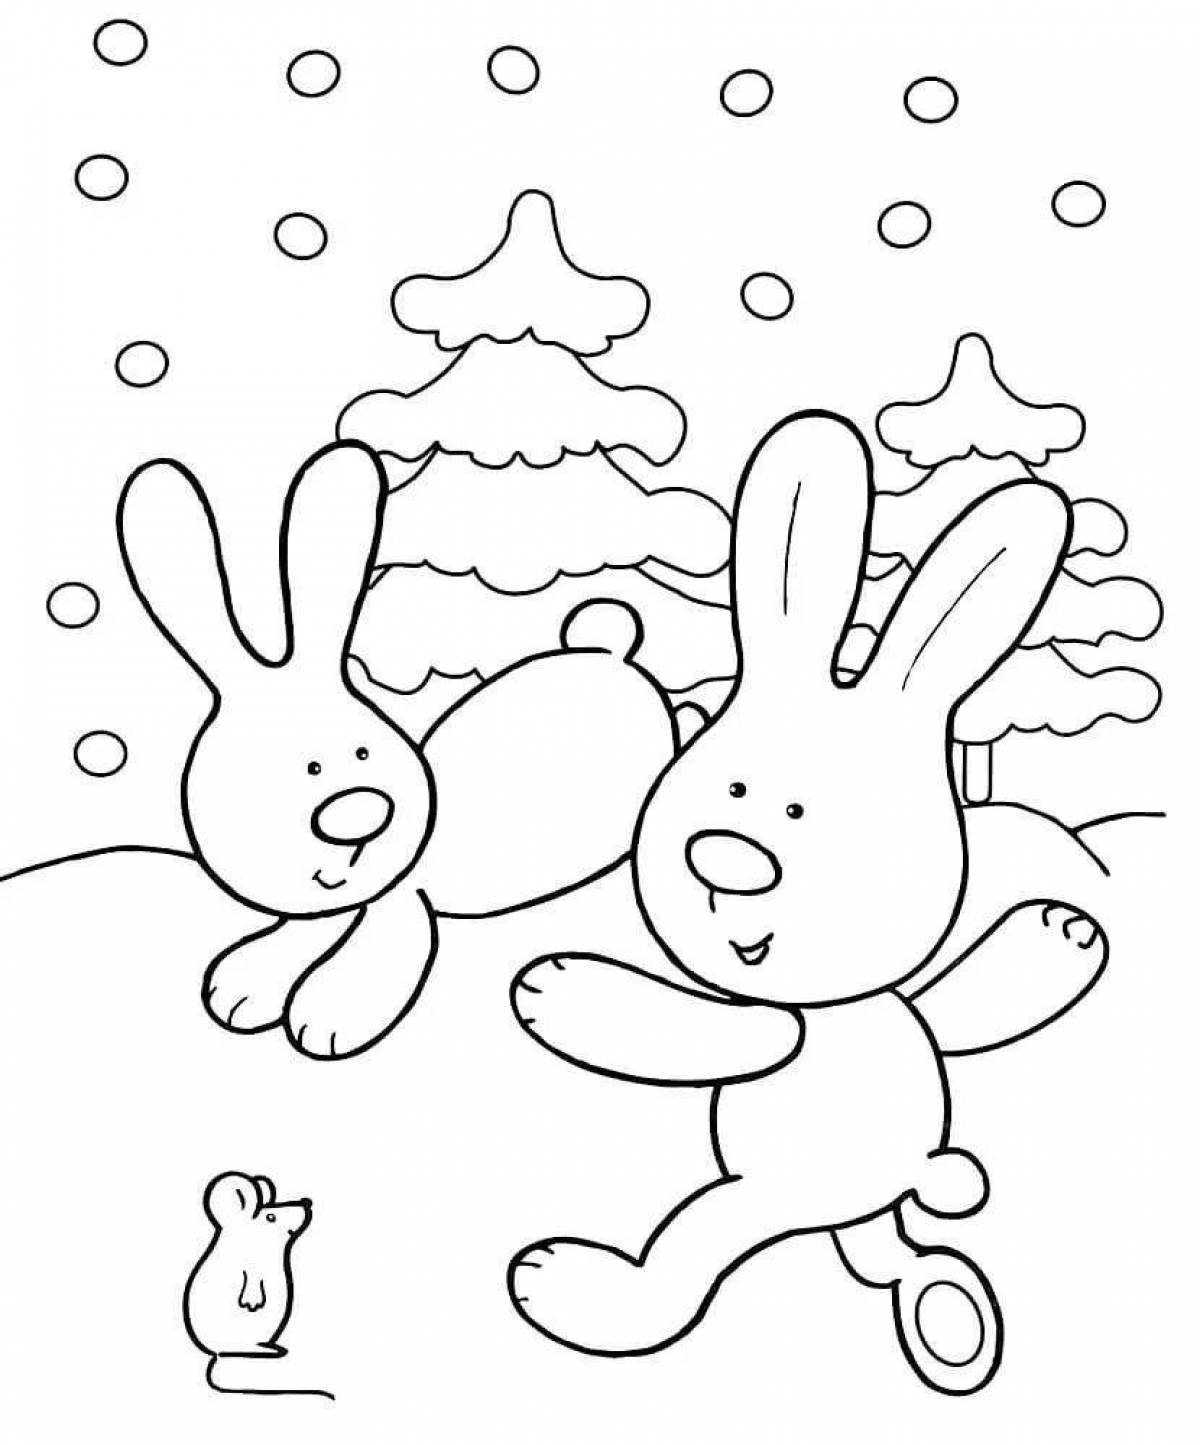 Coloring book glowing year of the hare